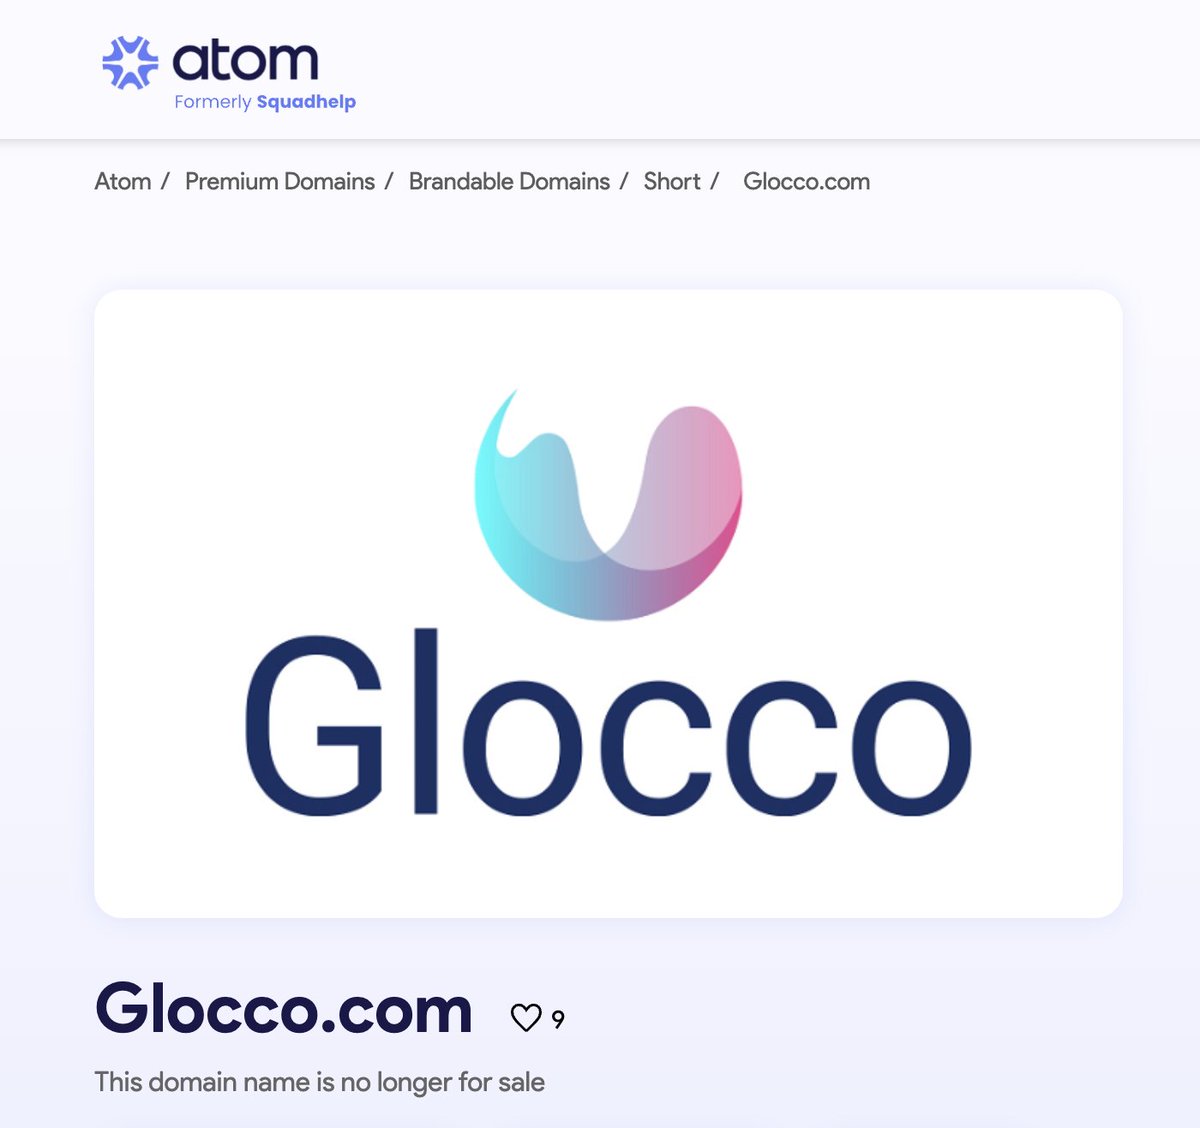 SOLD! Glocco. com for $3722 Sold Via Atom @squadhelp Purchase Price $25 Hold Time: 3 months